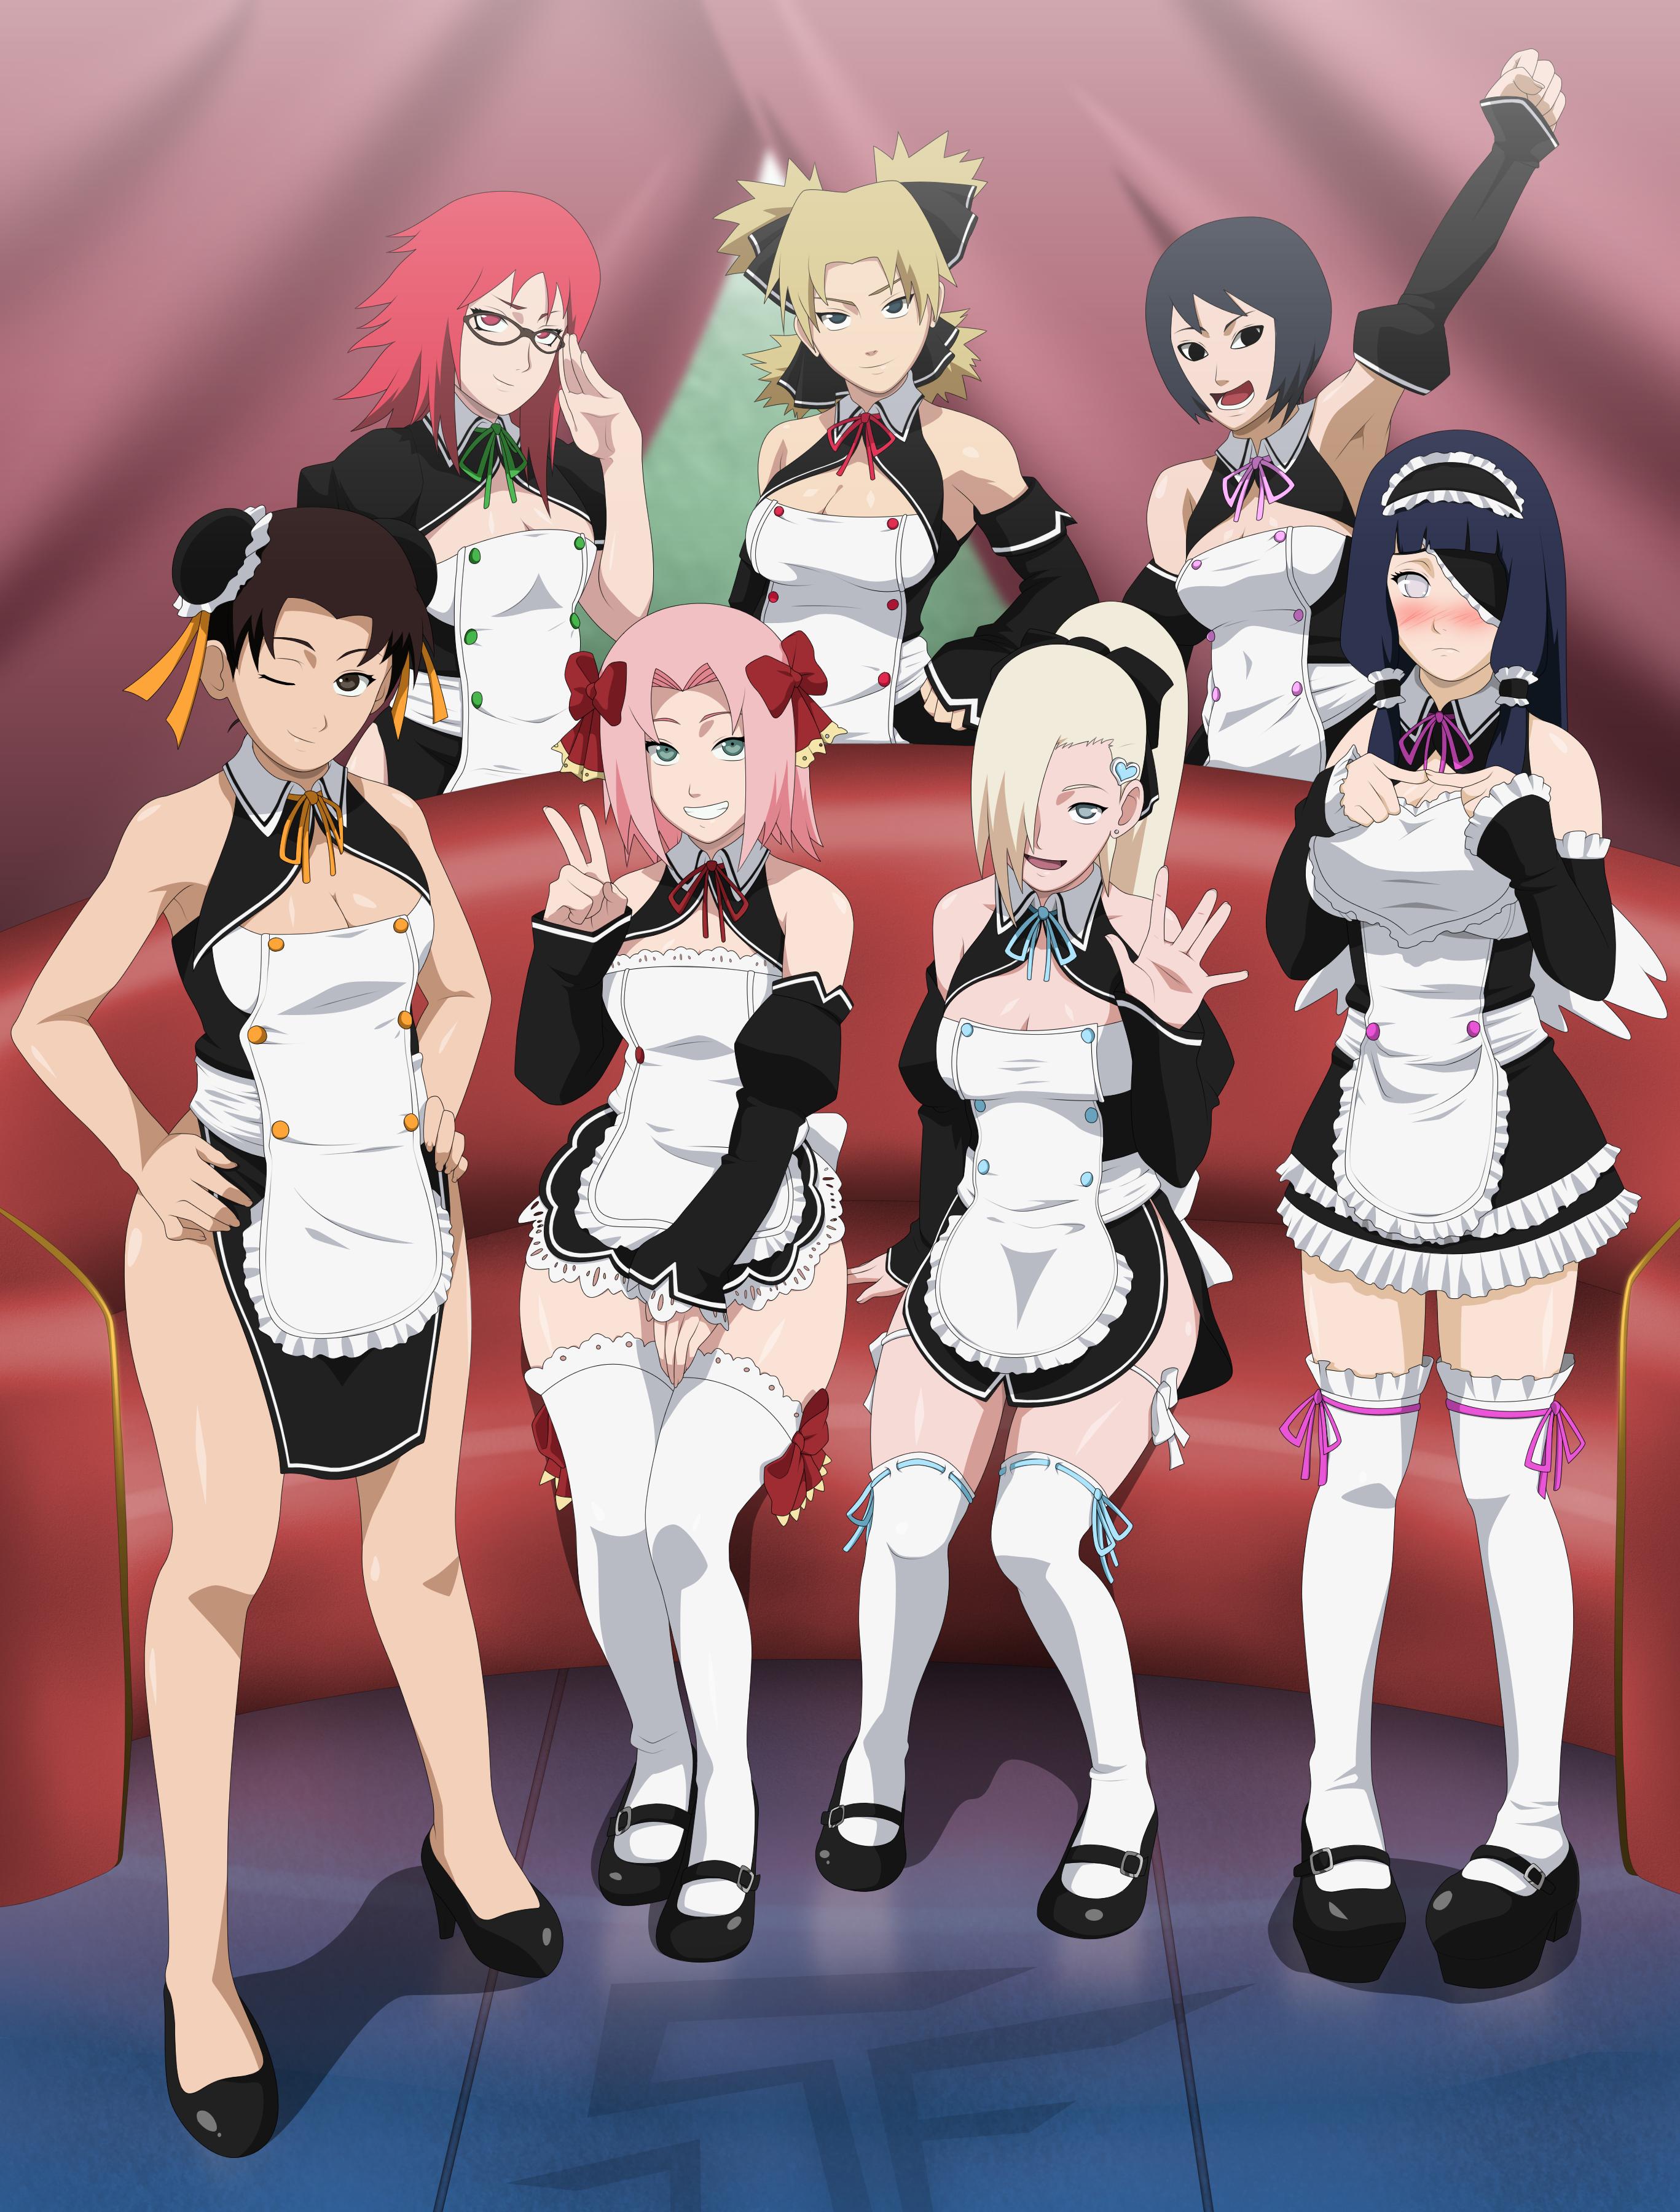 Whos your favorite maid?